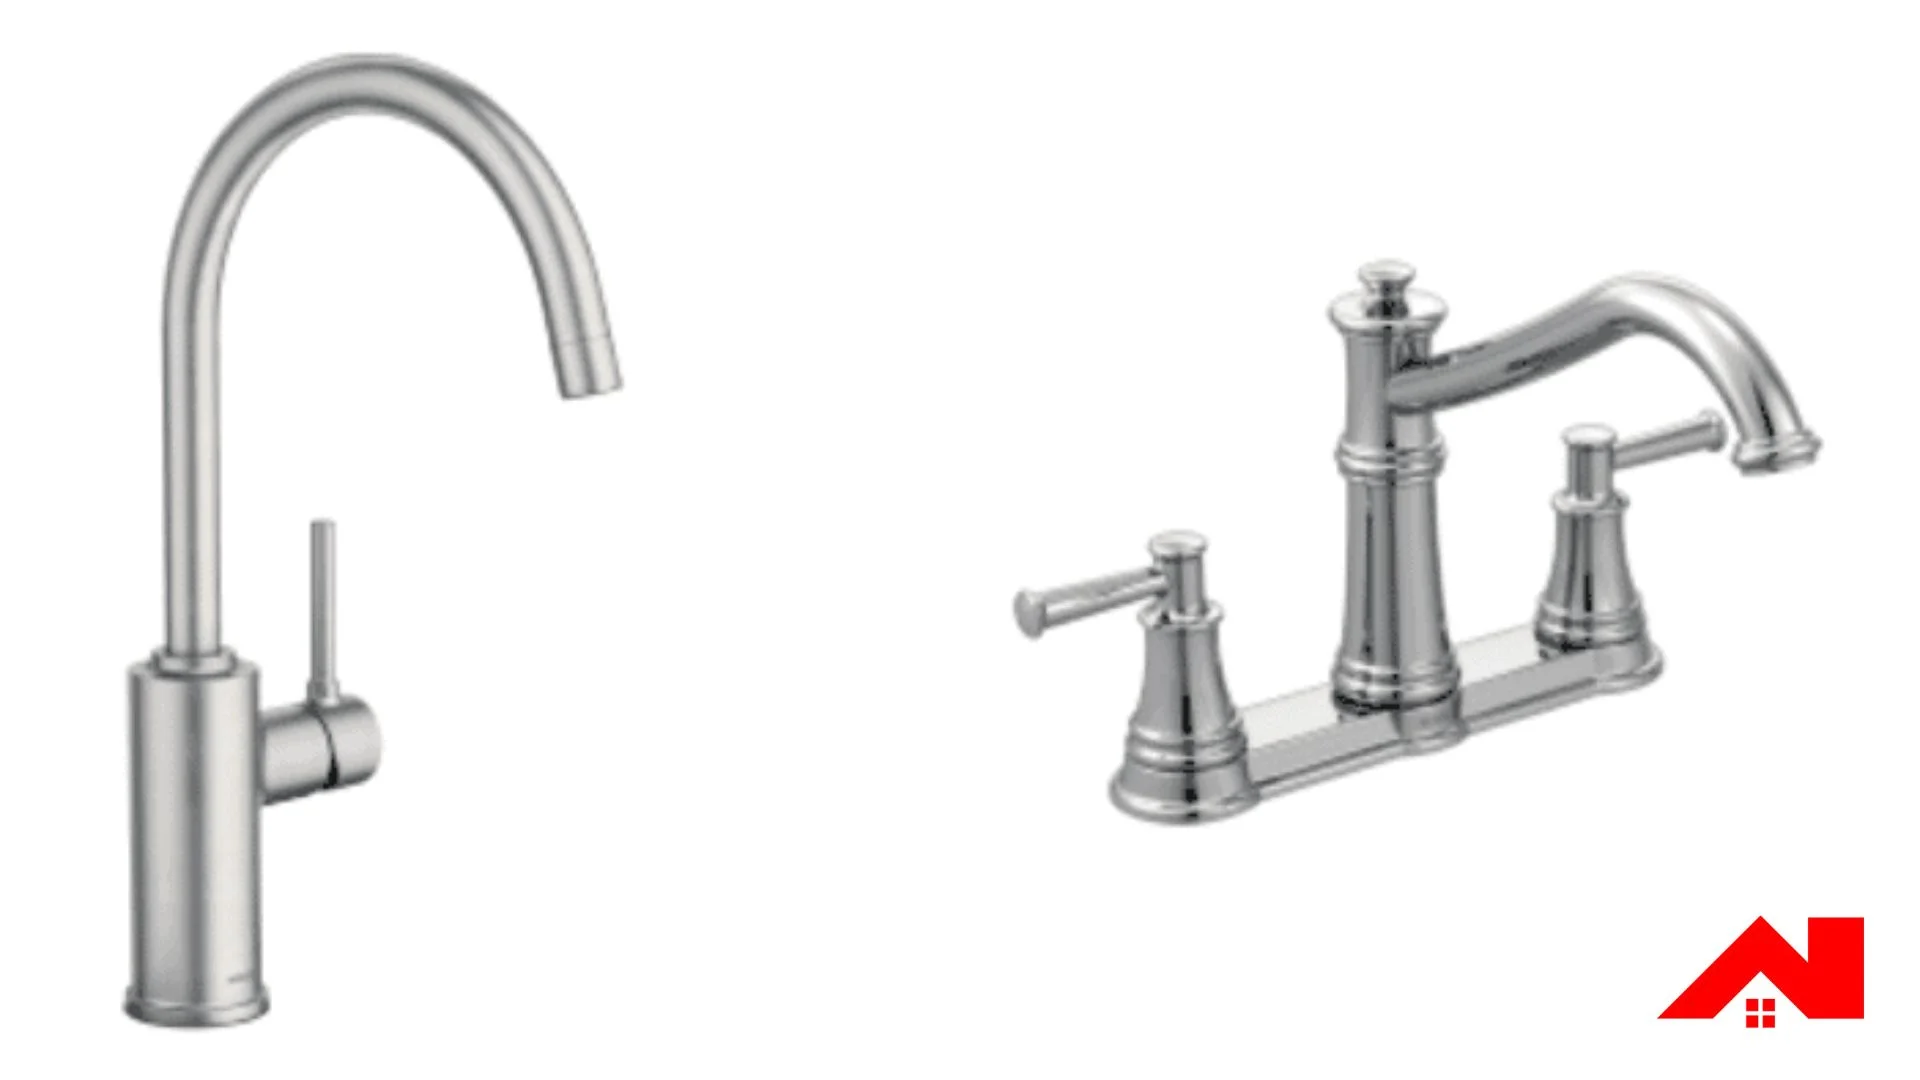 Types of Faucets